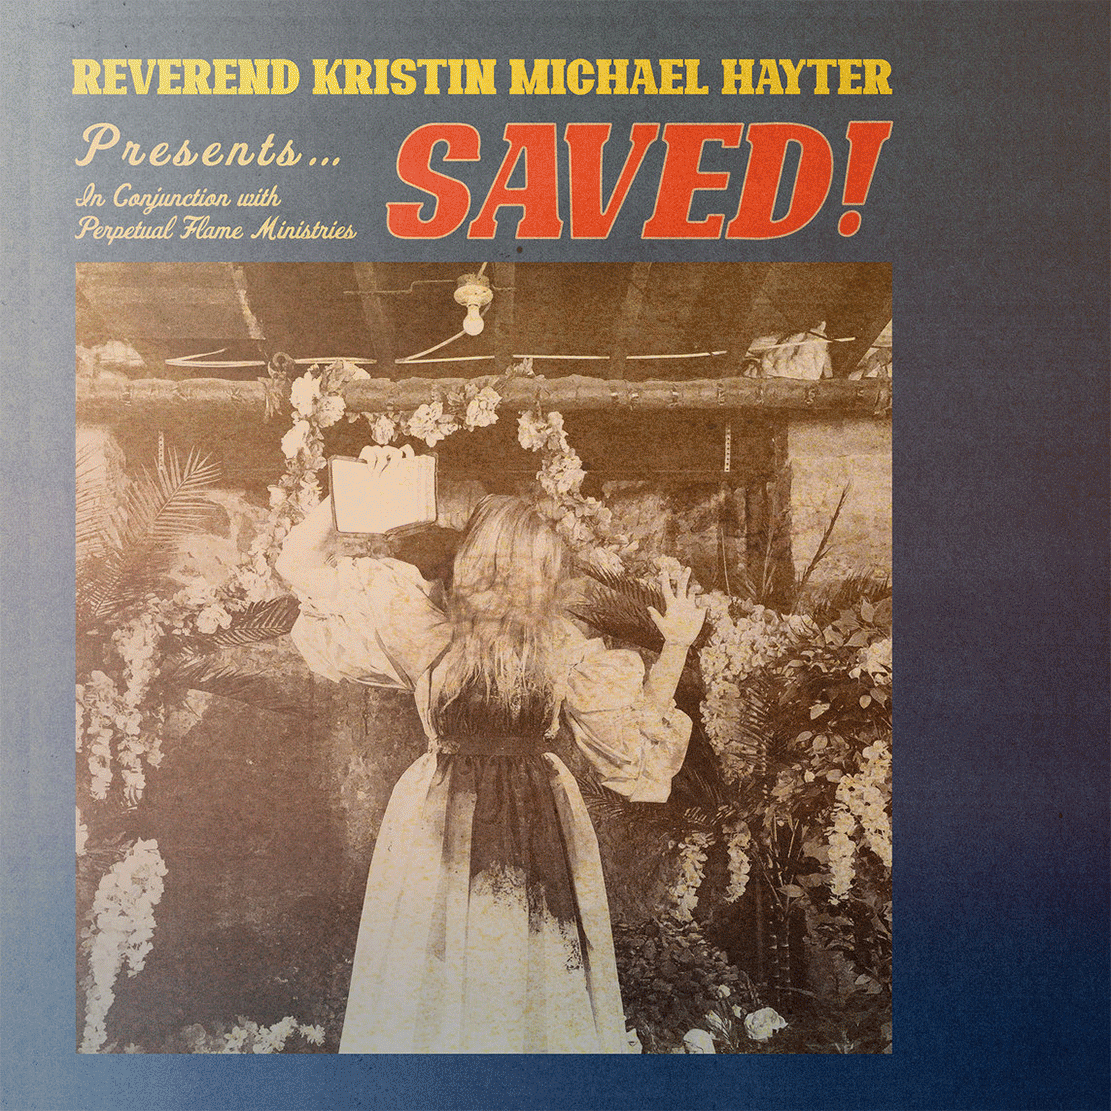   Reverend Kristin Michael Hayter -  SAVED!  /  The Index  [Perpetual Flame Ministries]  